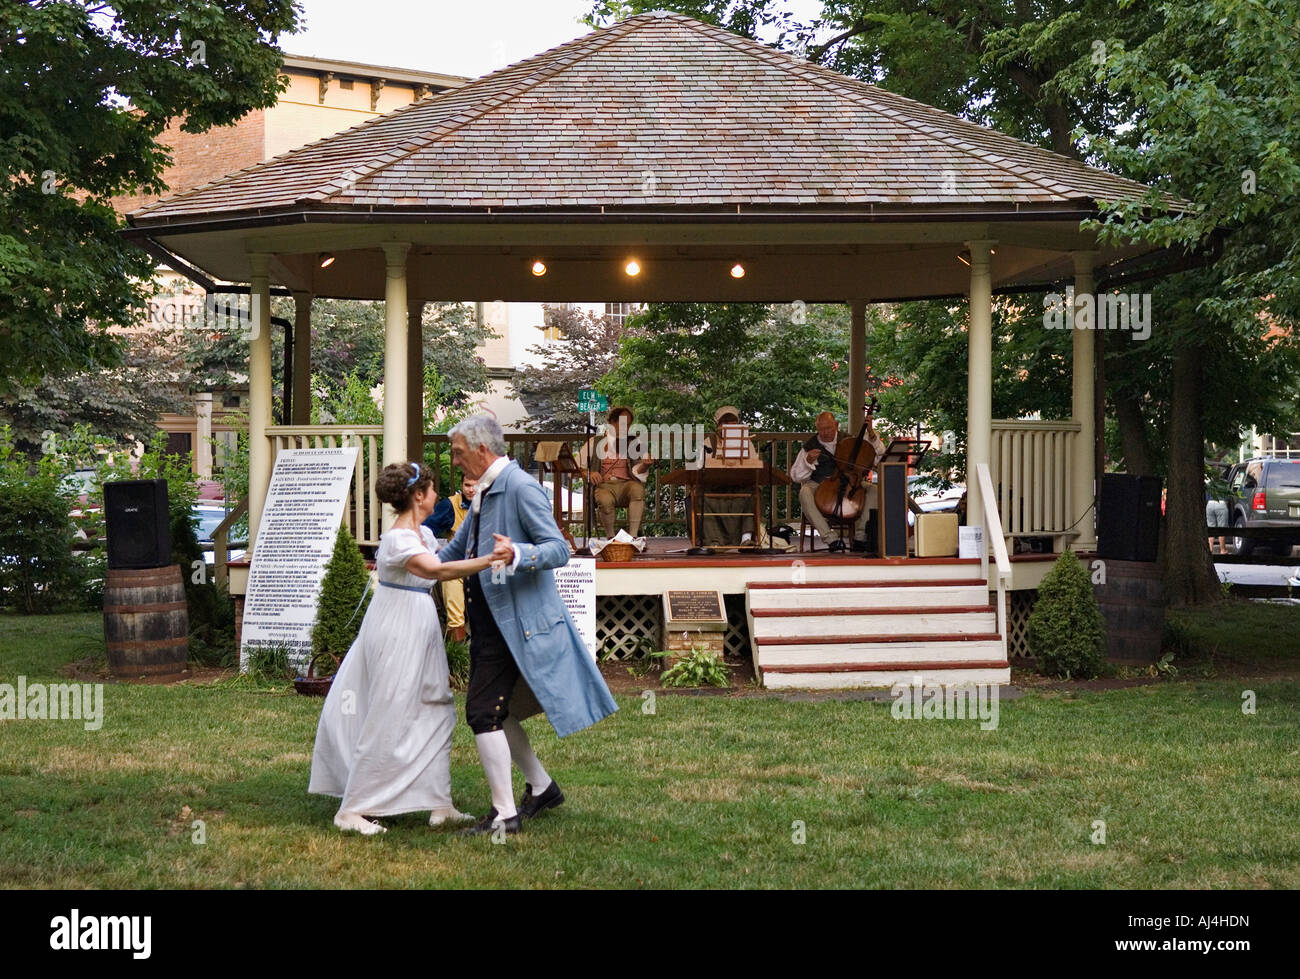 Older Couple in American Civil War Era Costume Dancing in front of Town Square Band Stand Corydon Indiana Stock Photo